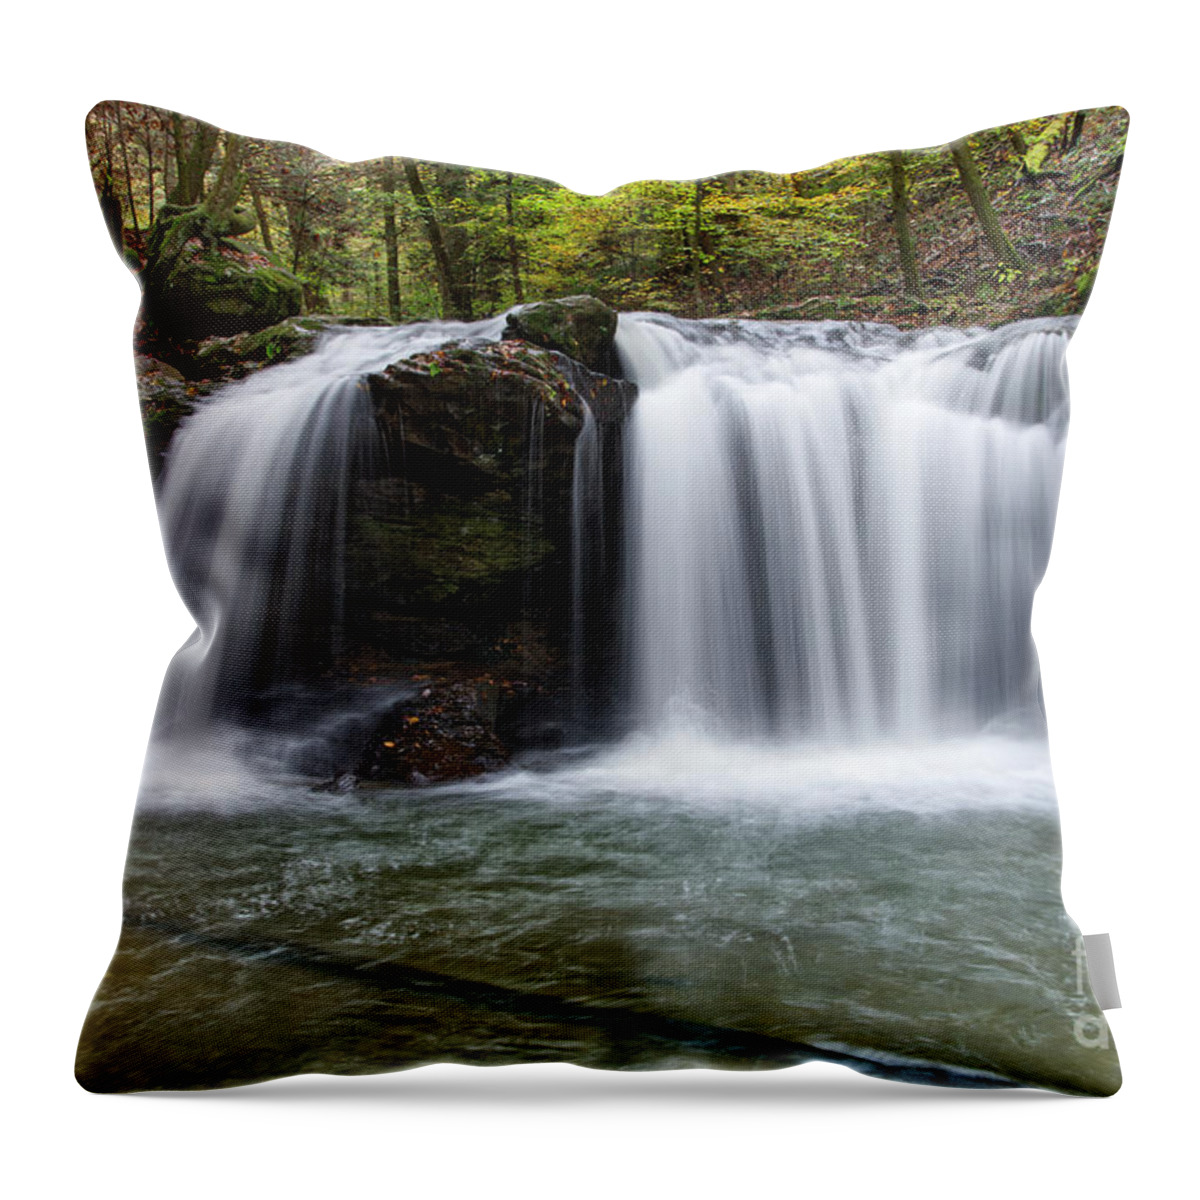 Debord Falls Throw Pillow featuring the photograph Debord Falls 16 by Phil Perkins